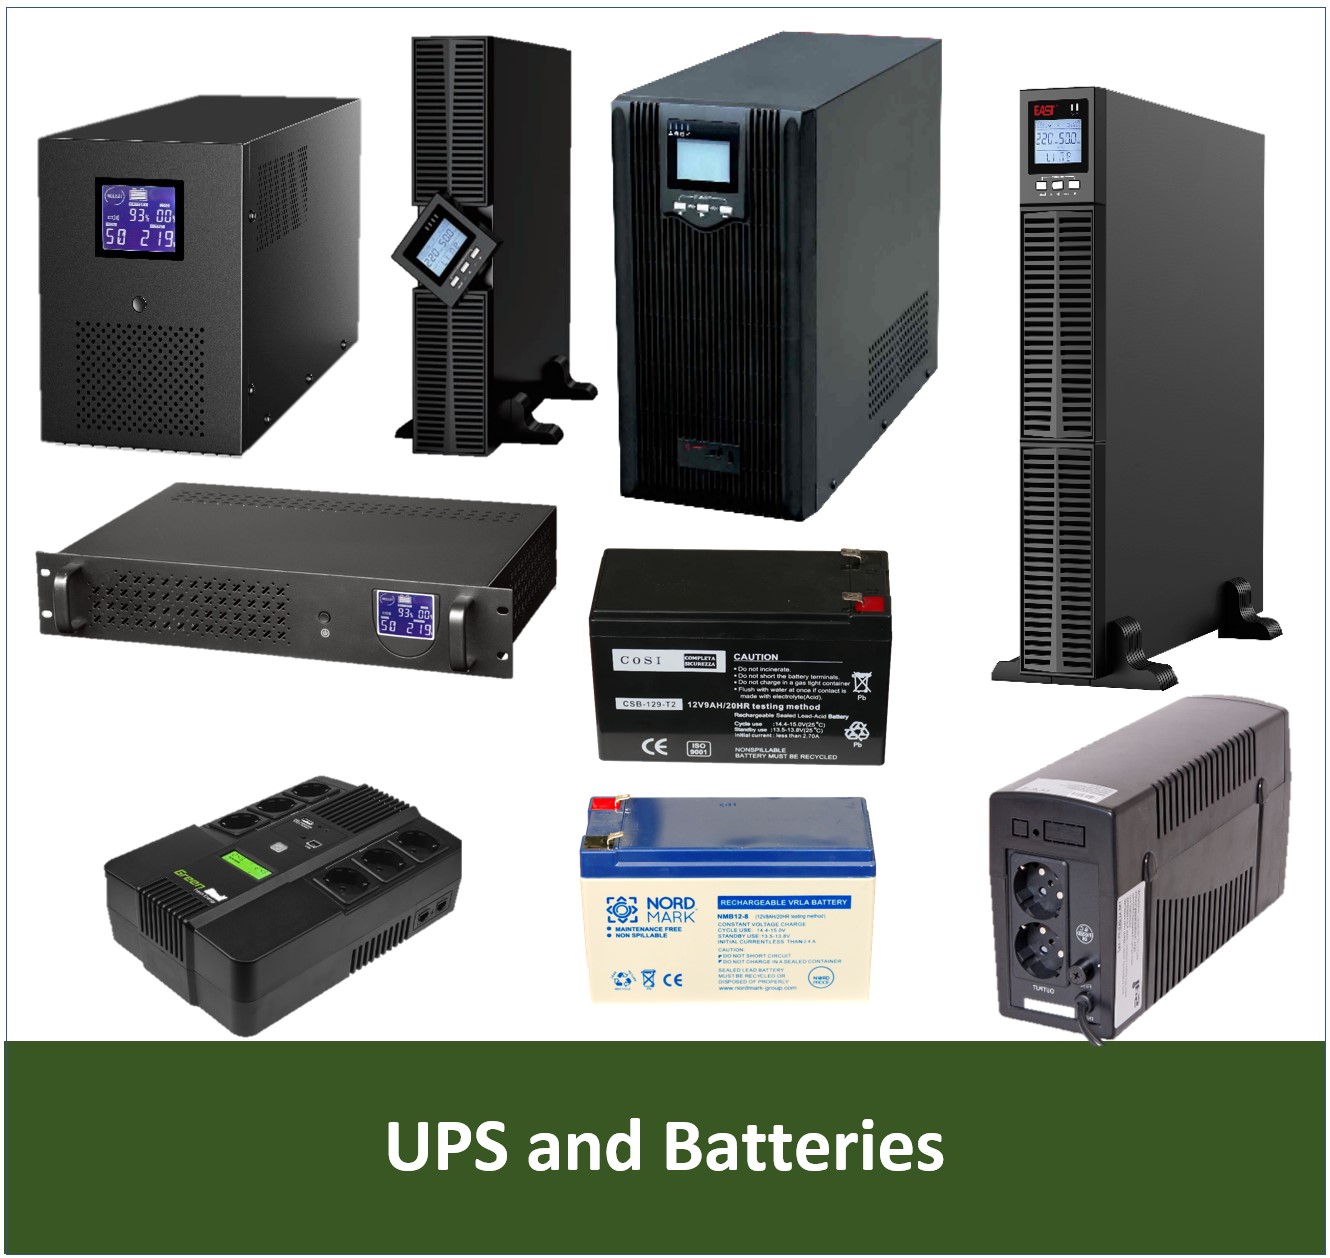 UPS and Batteries